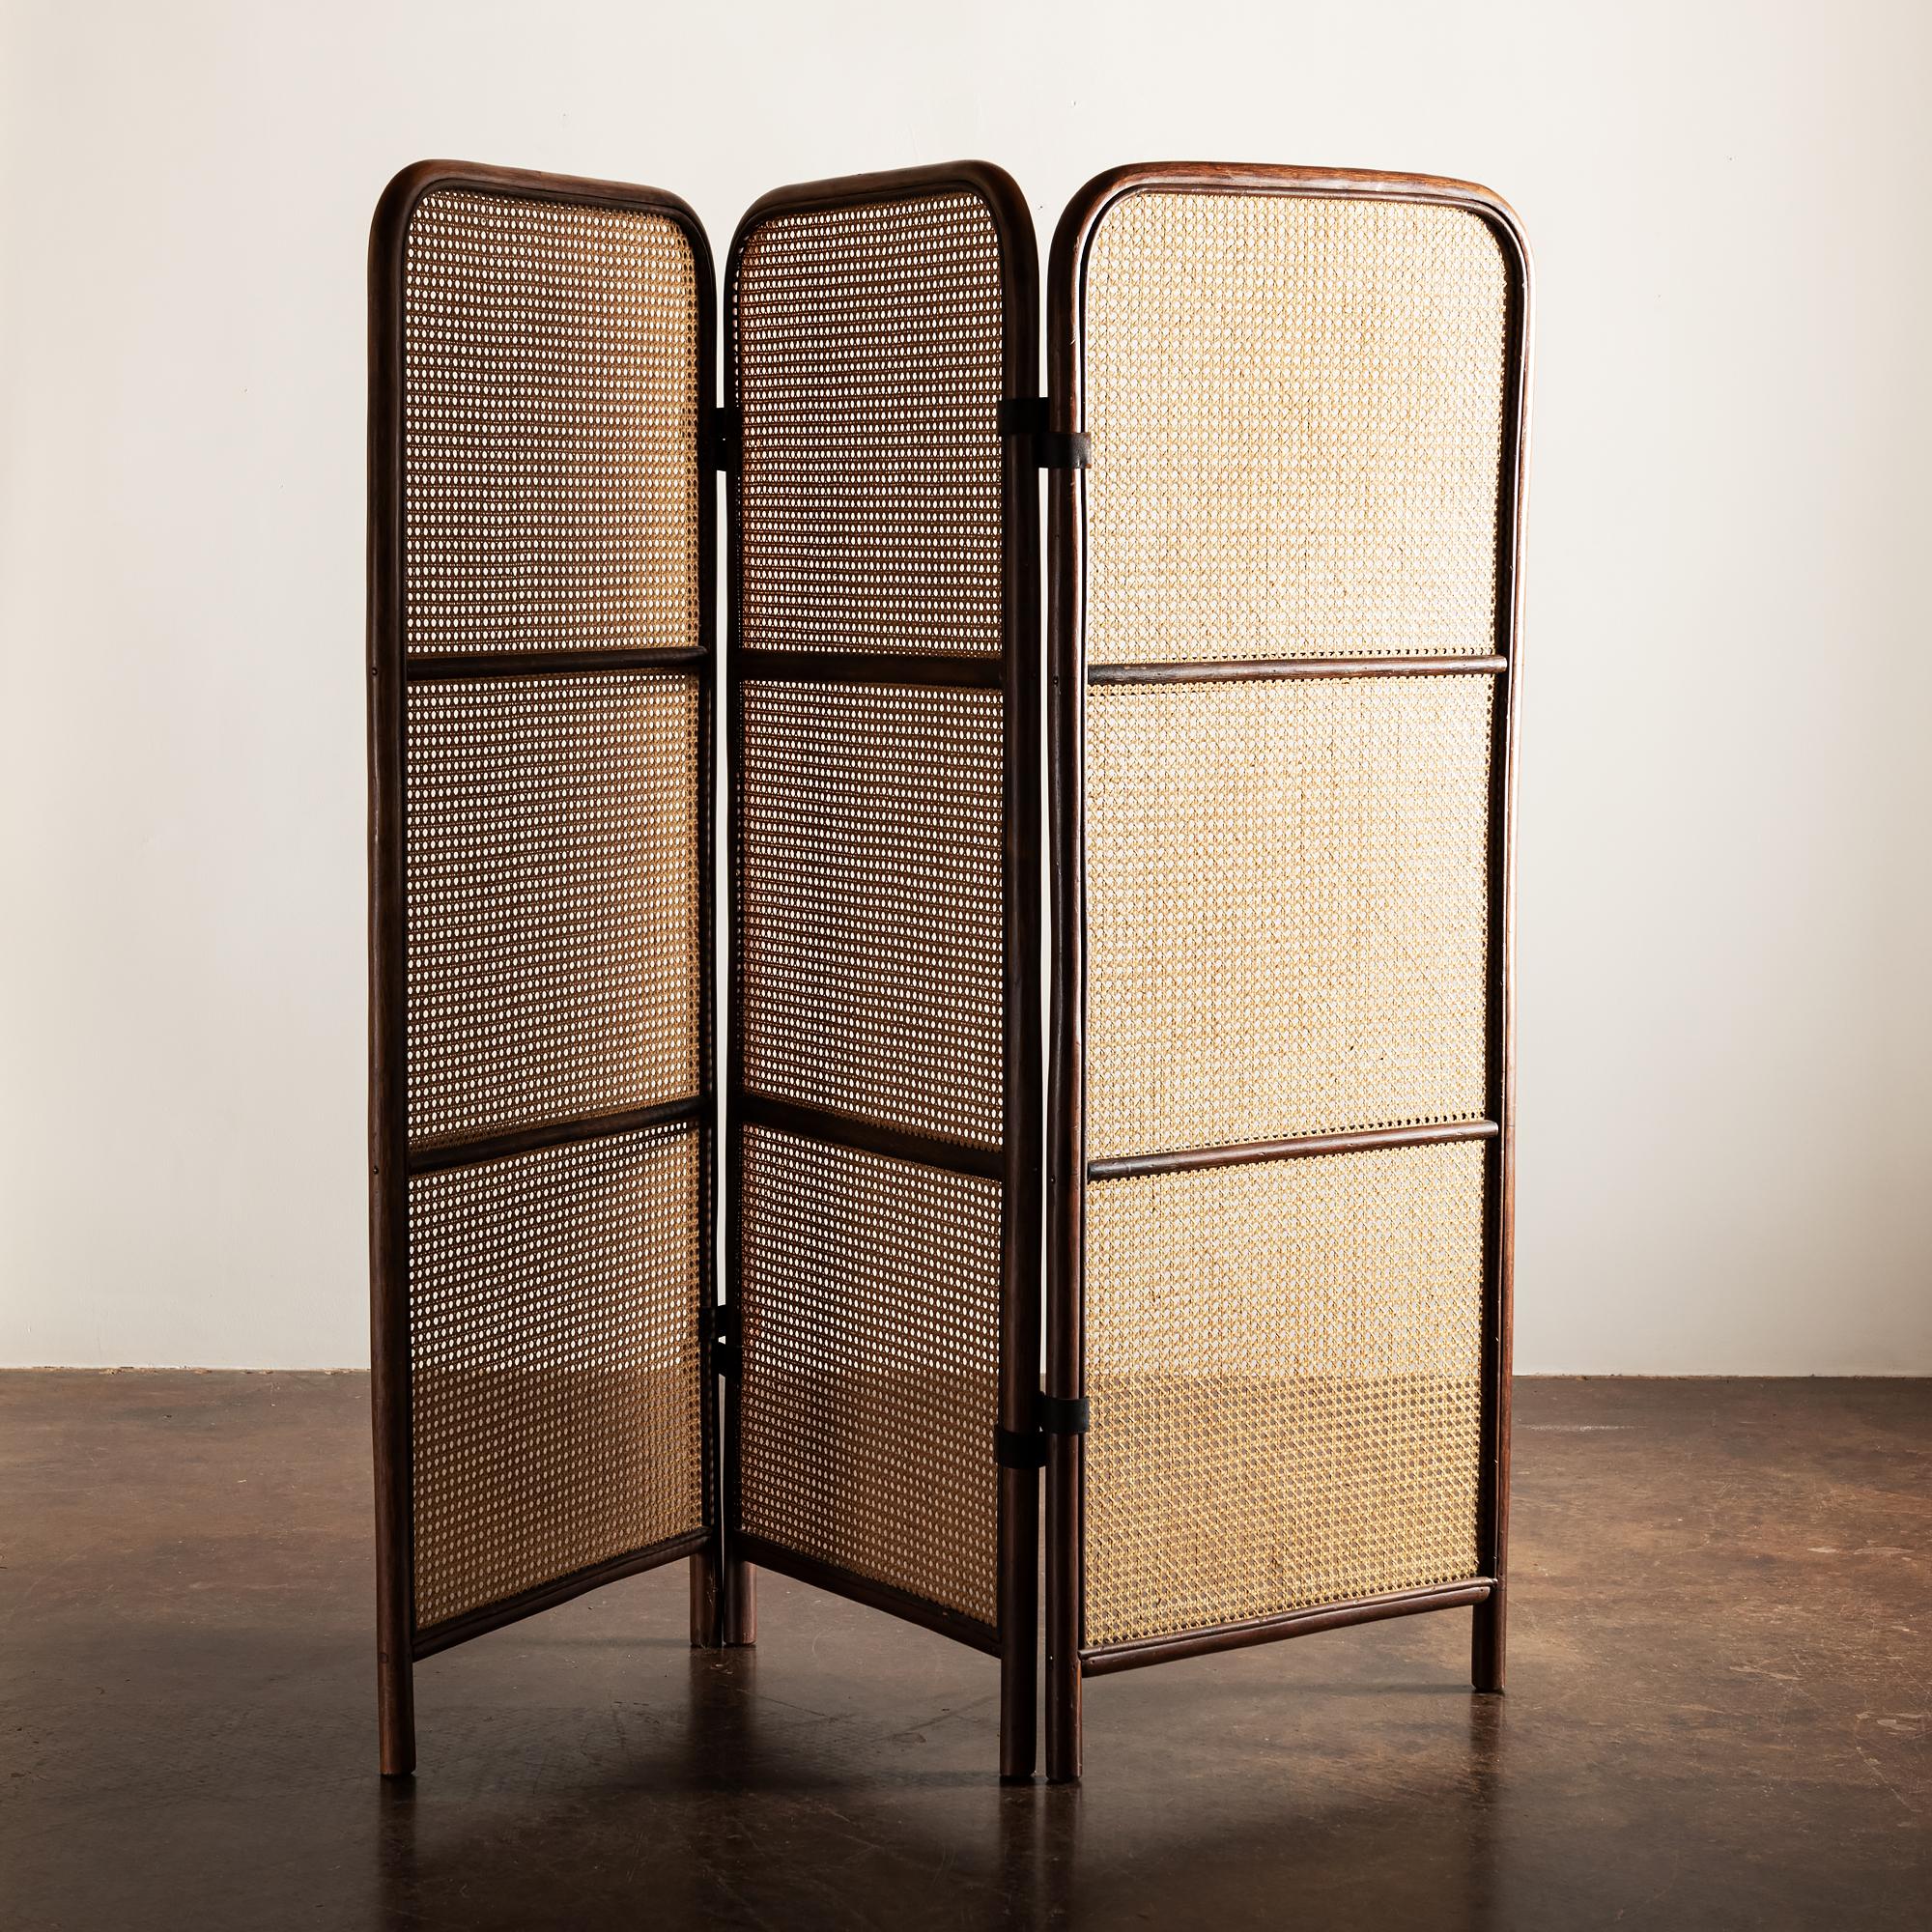 Lovely three-panel room divider in wood and cane with leather hinges, France, 1950s.